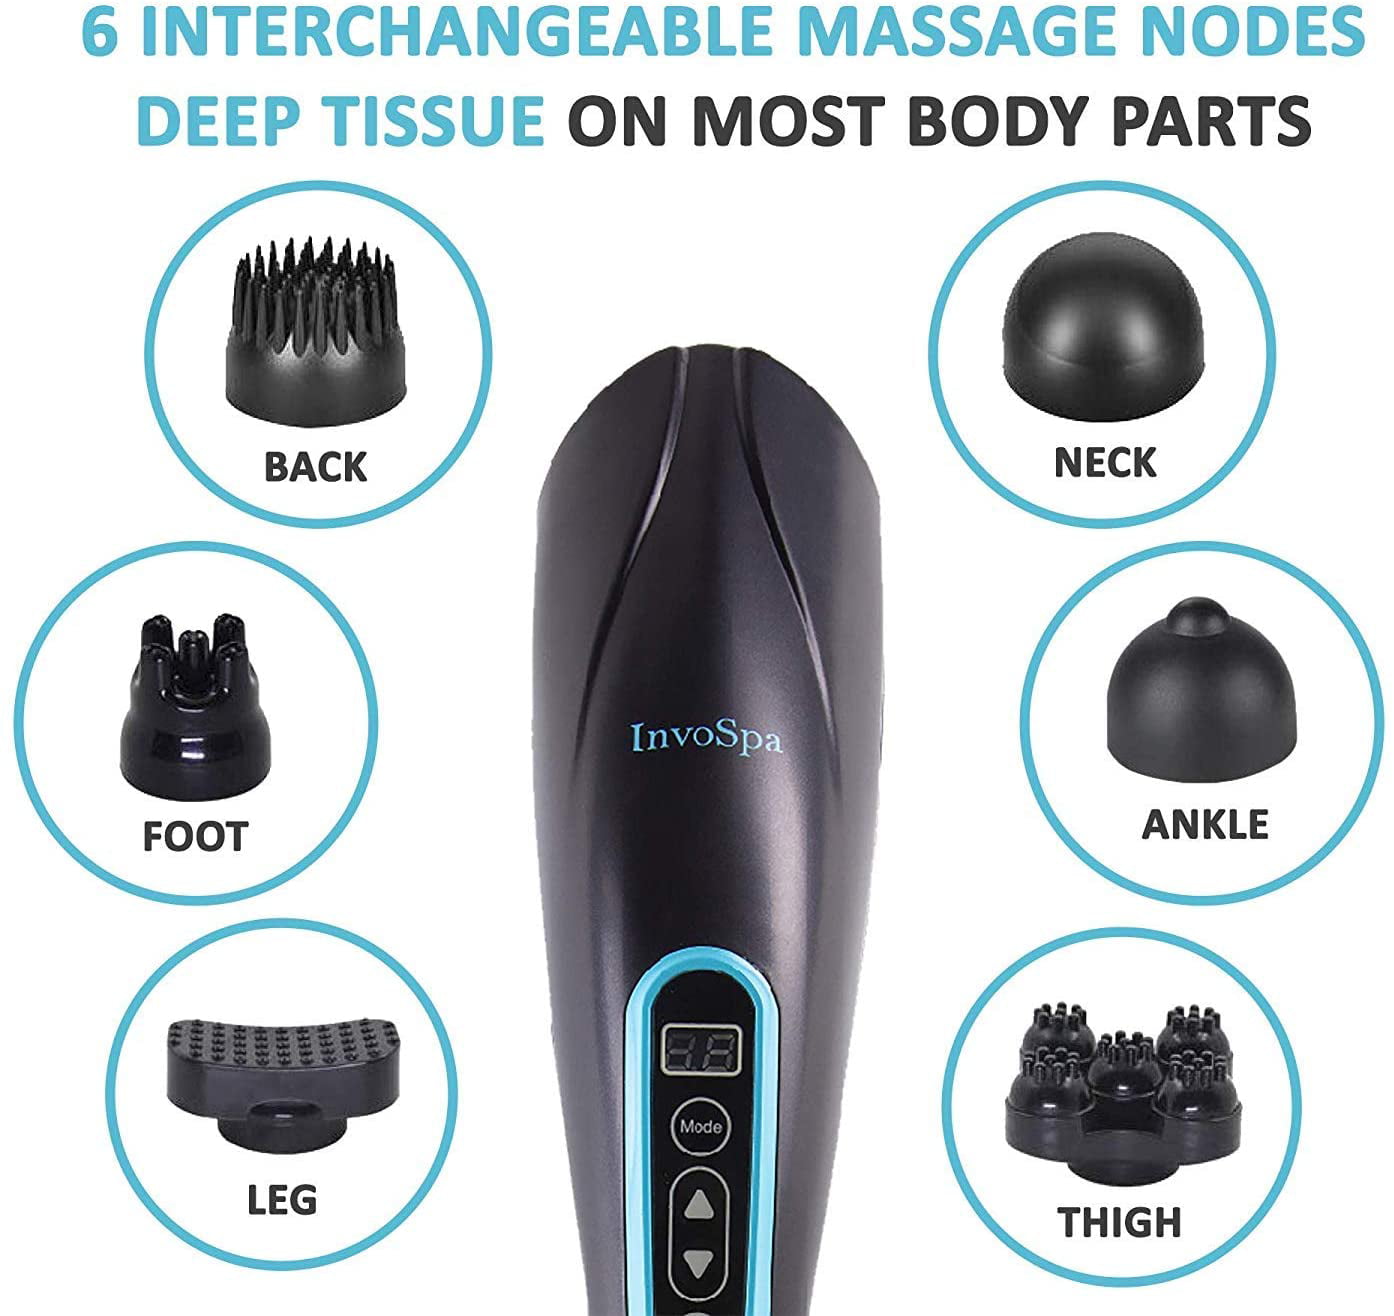 Handheld Percussion Massager, Electric Back Massage with Heat And